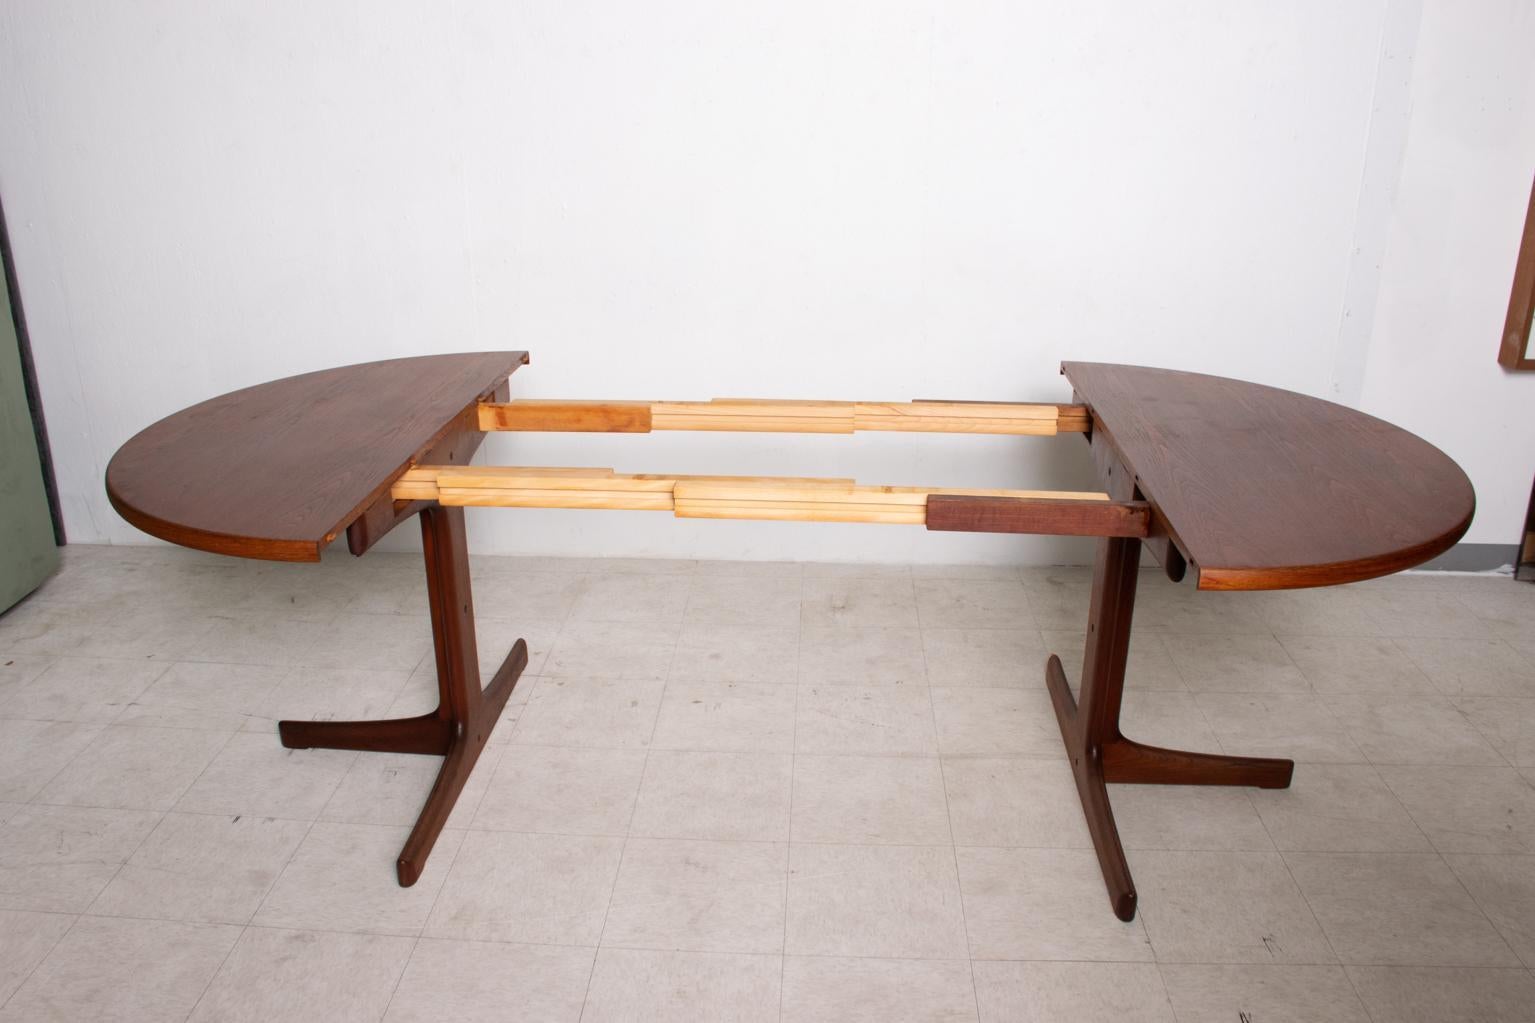 Round dining table can be extended into an oval dining table. Seats 10.
Made in Denmark, circa the 1980s. Teak wood. No markings from the maker.
Dimensions: 95